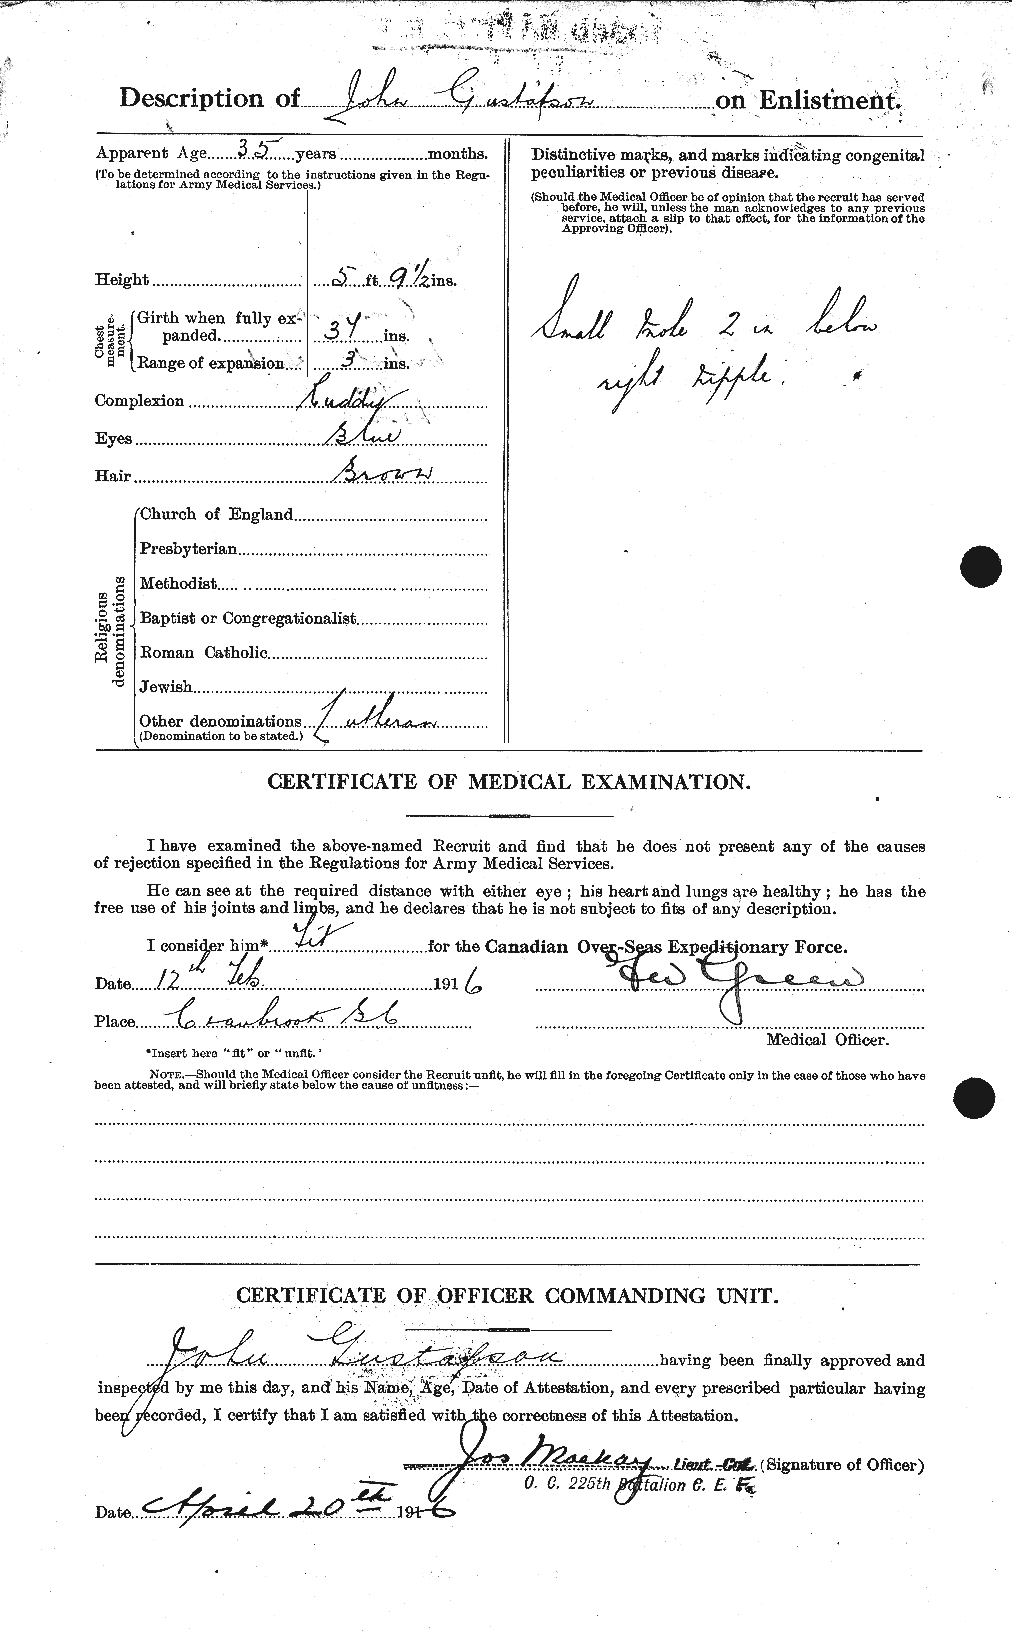 Personnel Records of the First World War - CEF 369996b